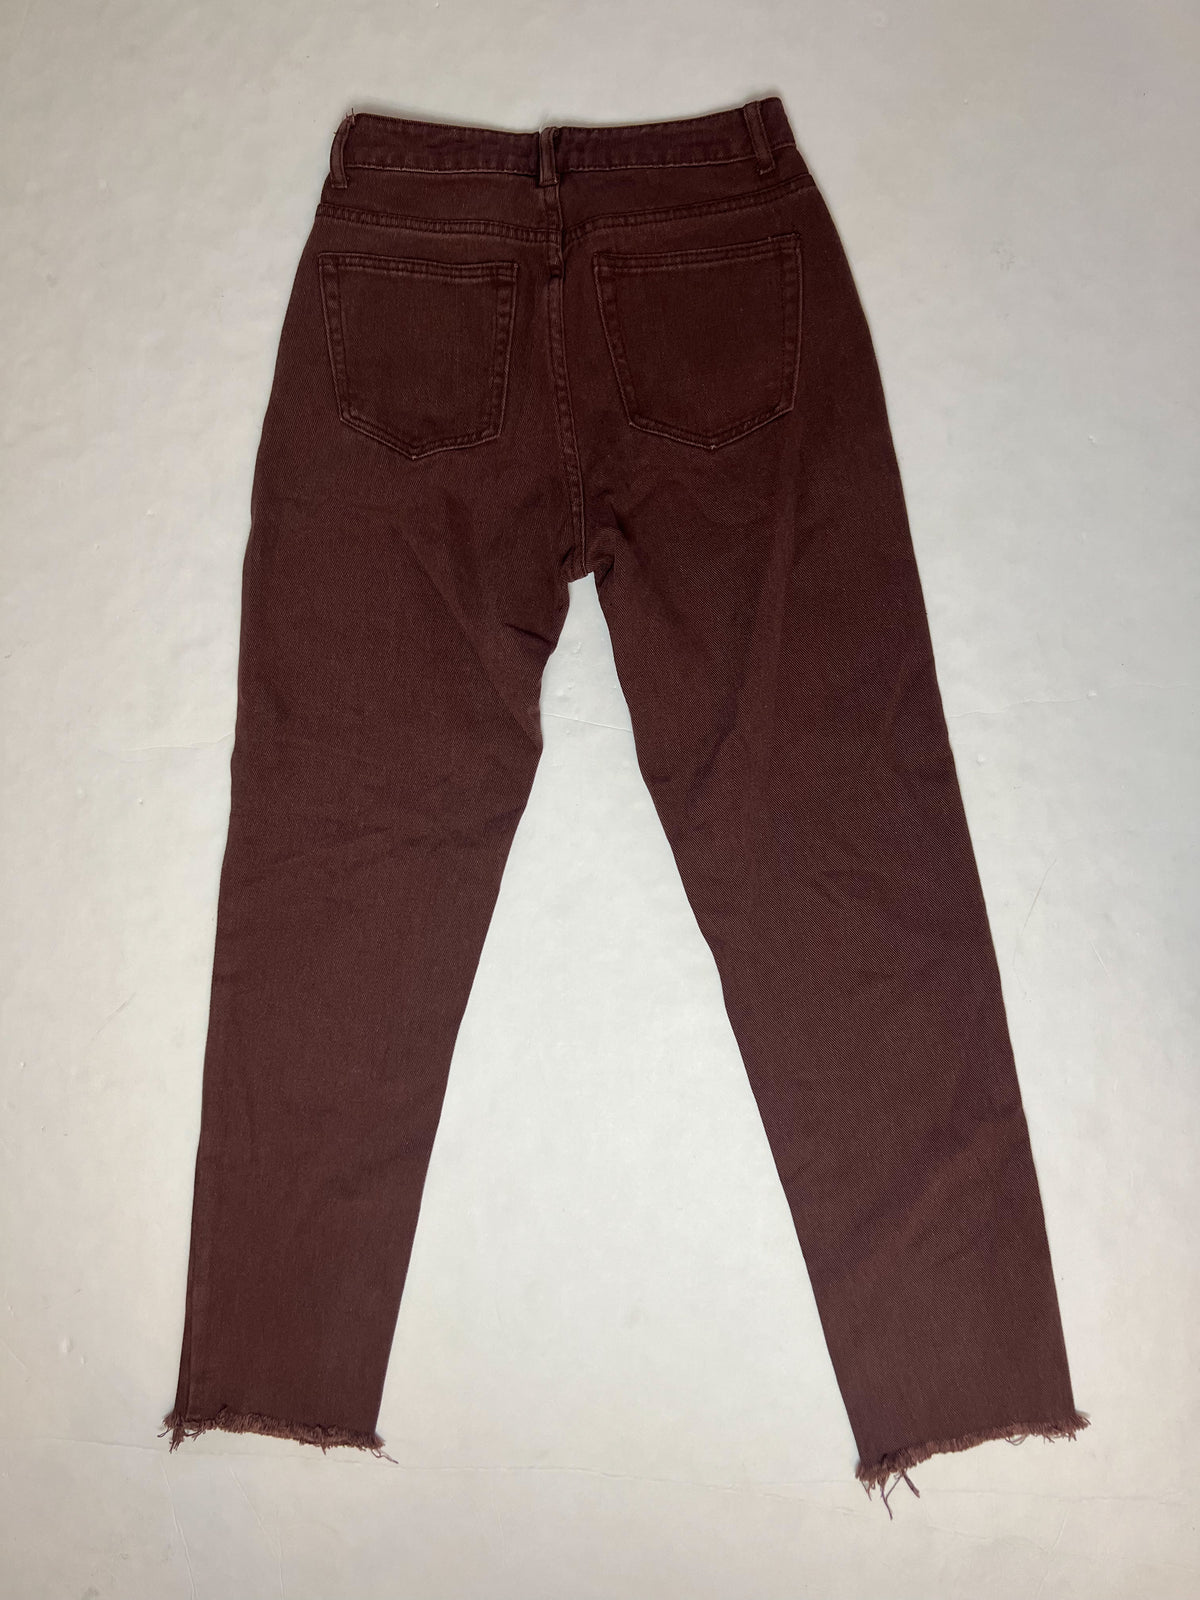 Edikted- Brown Denim-New with Tags